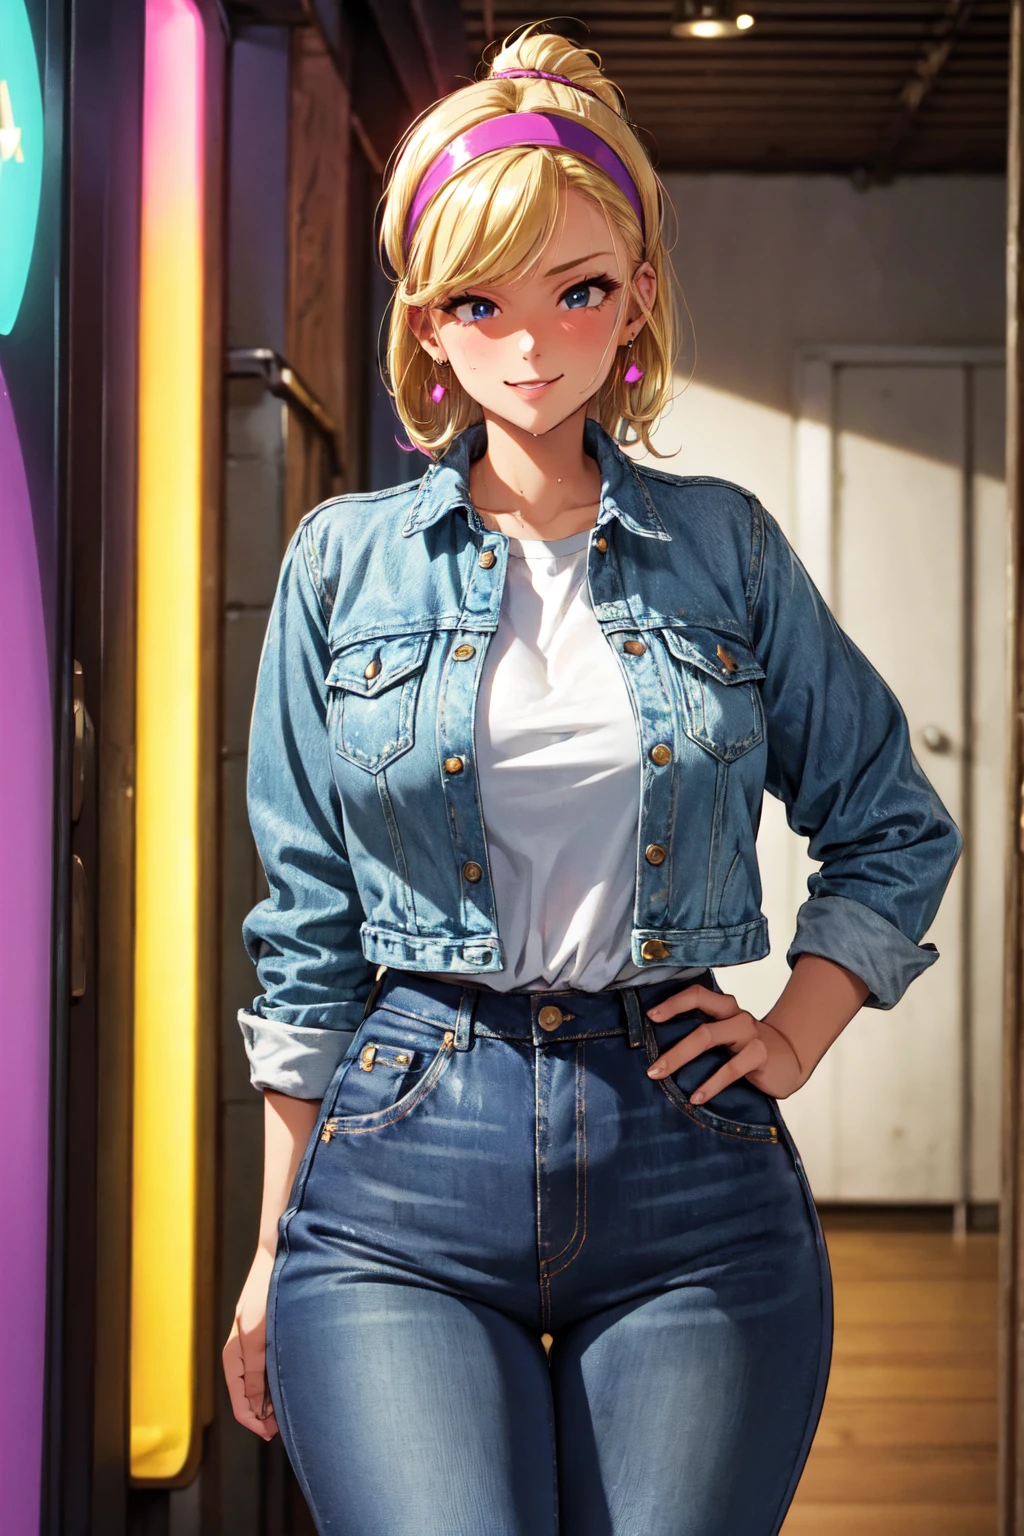 (high quality, High resolution, Finer details), Retro Fashion, Neon Light, outfits from the 80's, High Waist Jeans, colorful pattern, Patchwork Denim Jacket, Funky Earrings, Stylish headband, alone, Curvy Women, blonde, Big Hair, Slicked back hair, Sparkling eyes, (fine grain:1.2), (Bright makeup:0.2), smile, blush, Sweat, Oily skin, Shallow depth of field，logic，Abdominal logics
